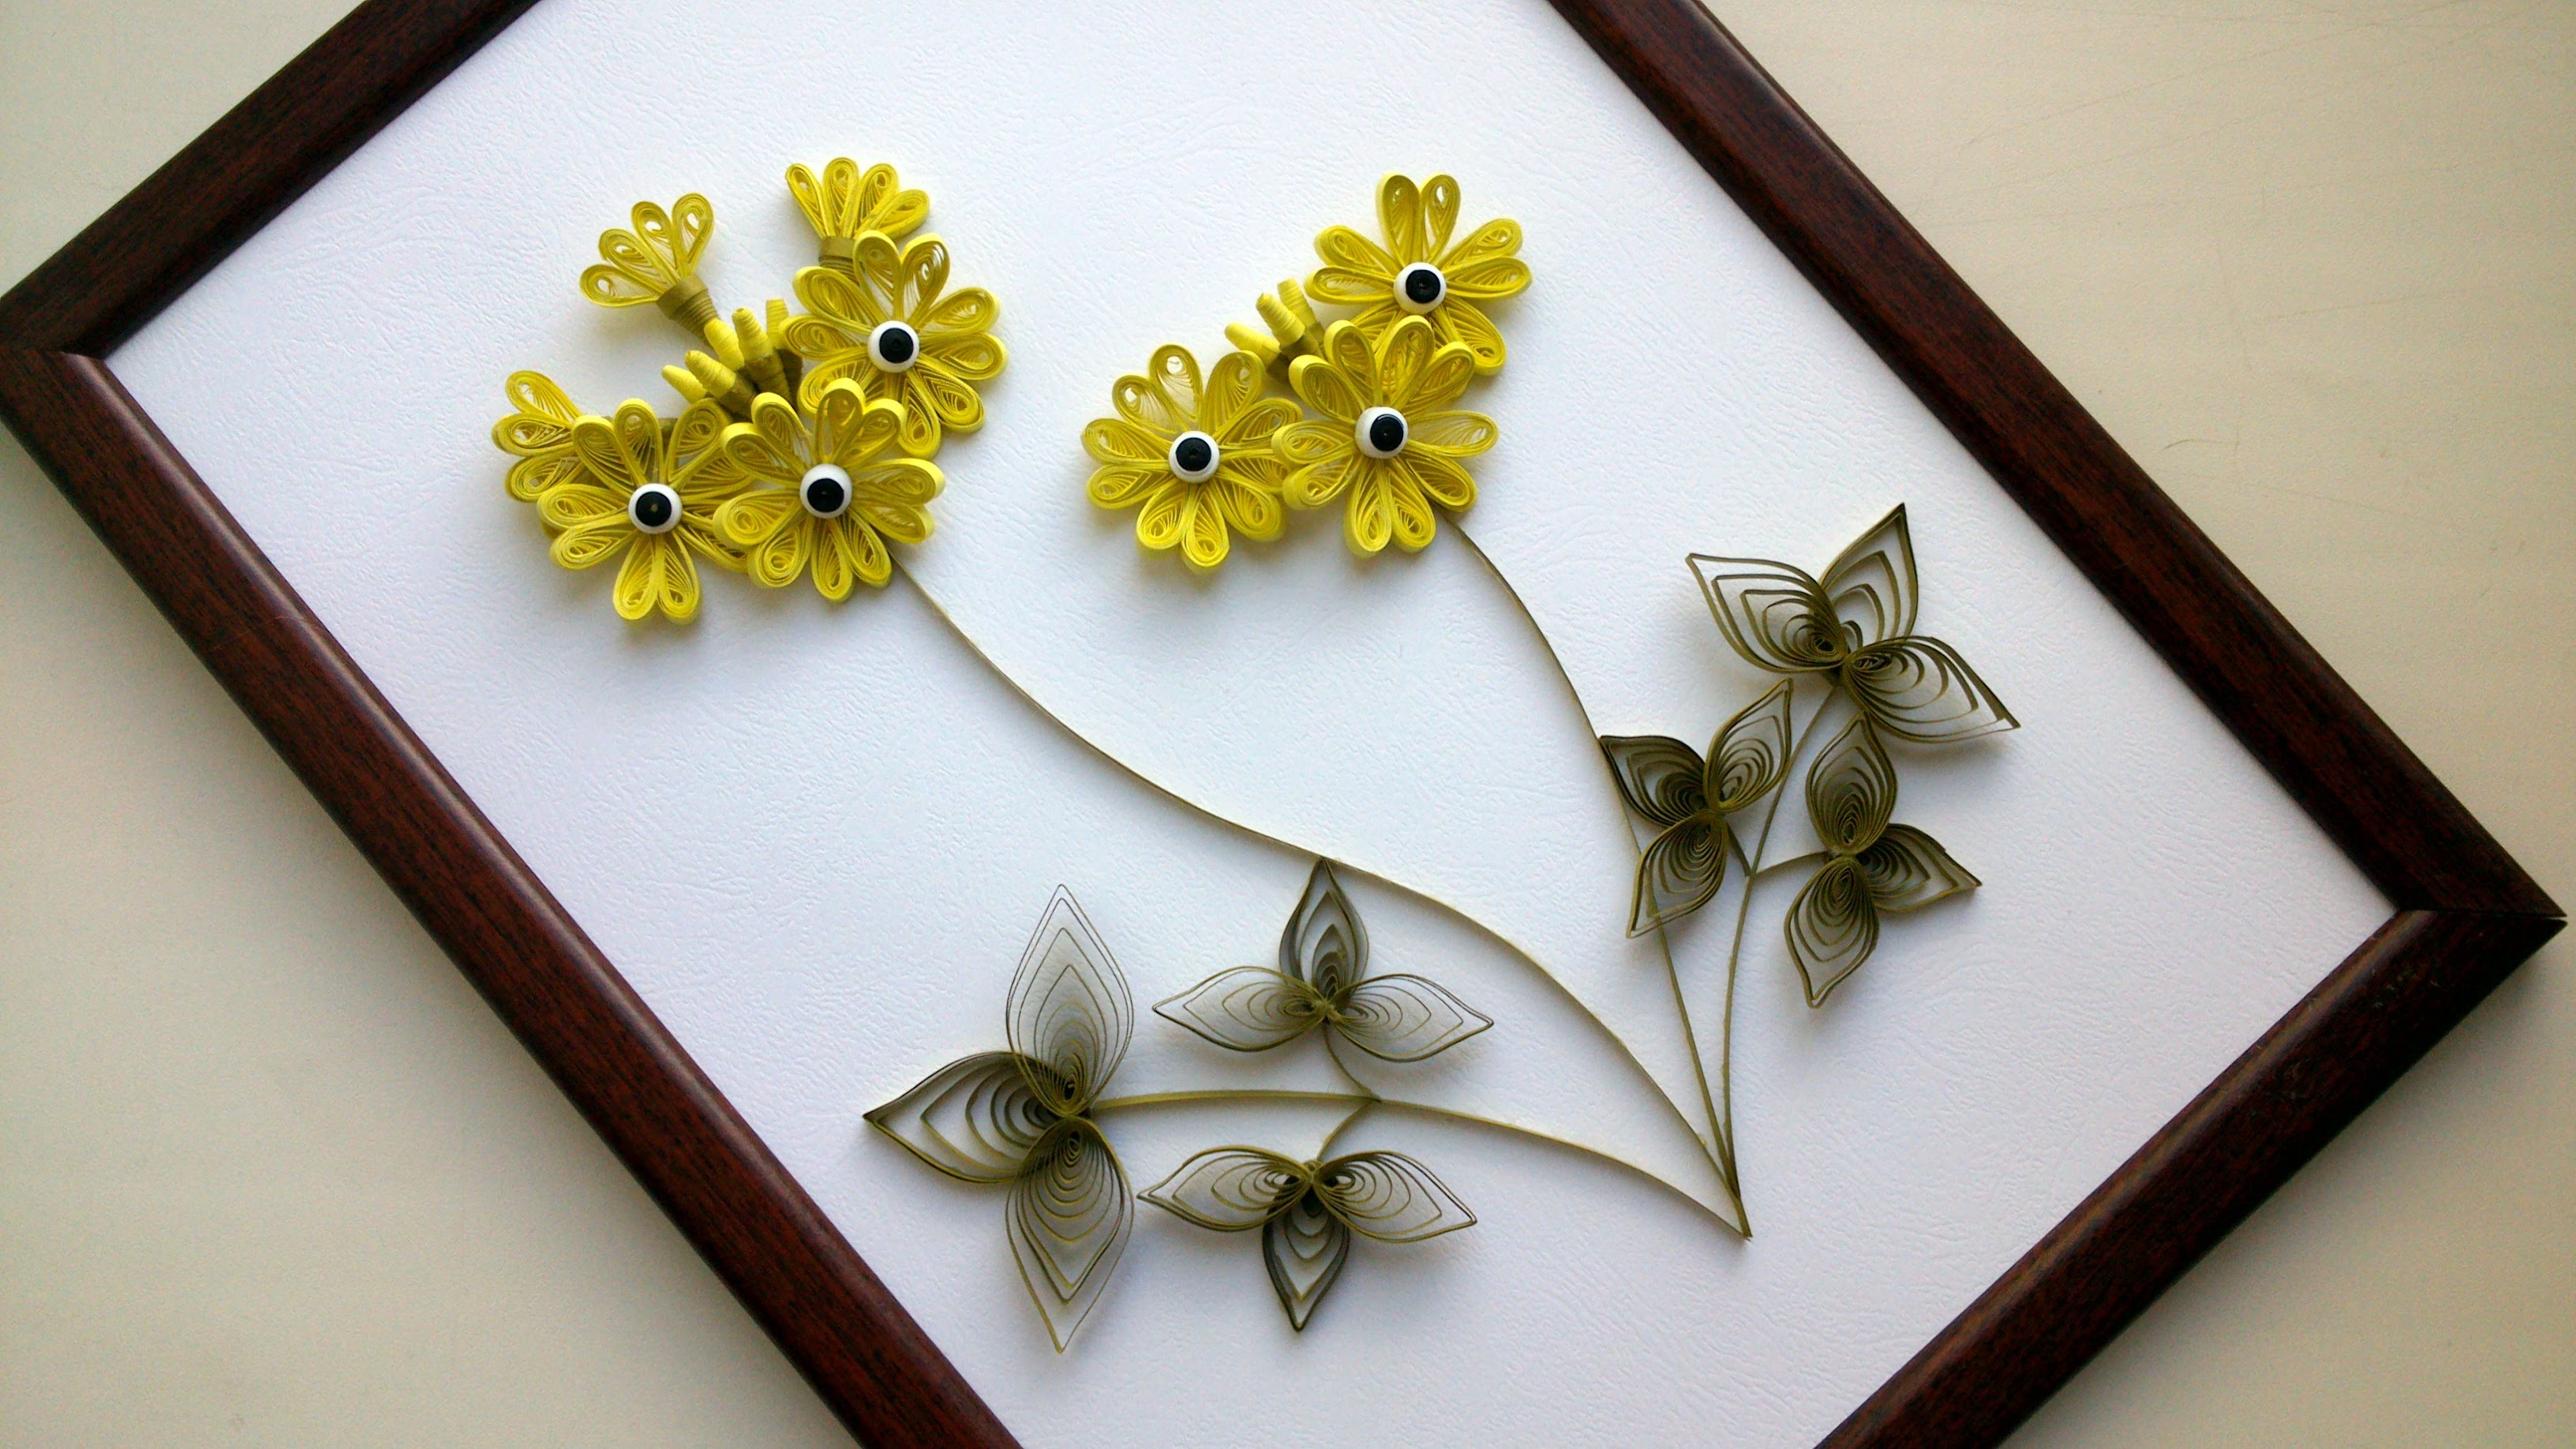 DIY Home Decor With Paper Quilling Art : DIY Room Decor With Quilling